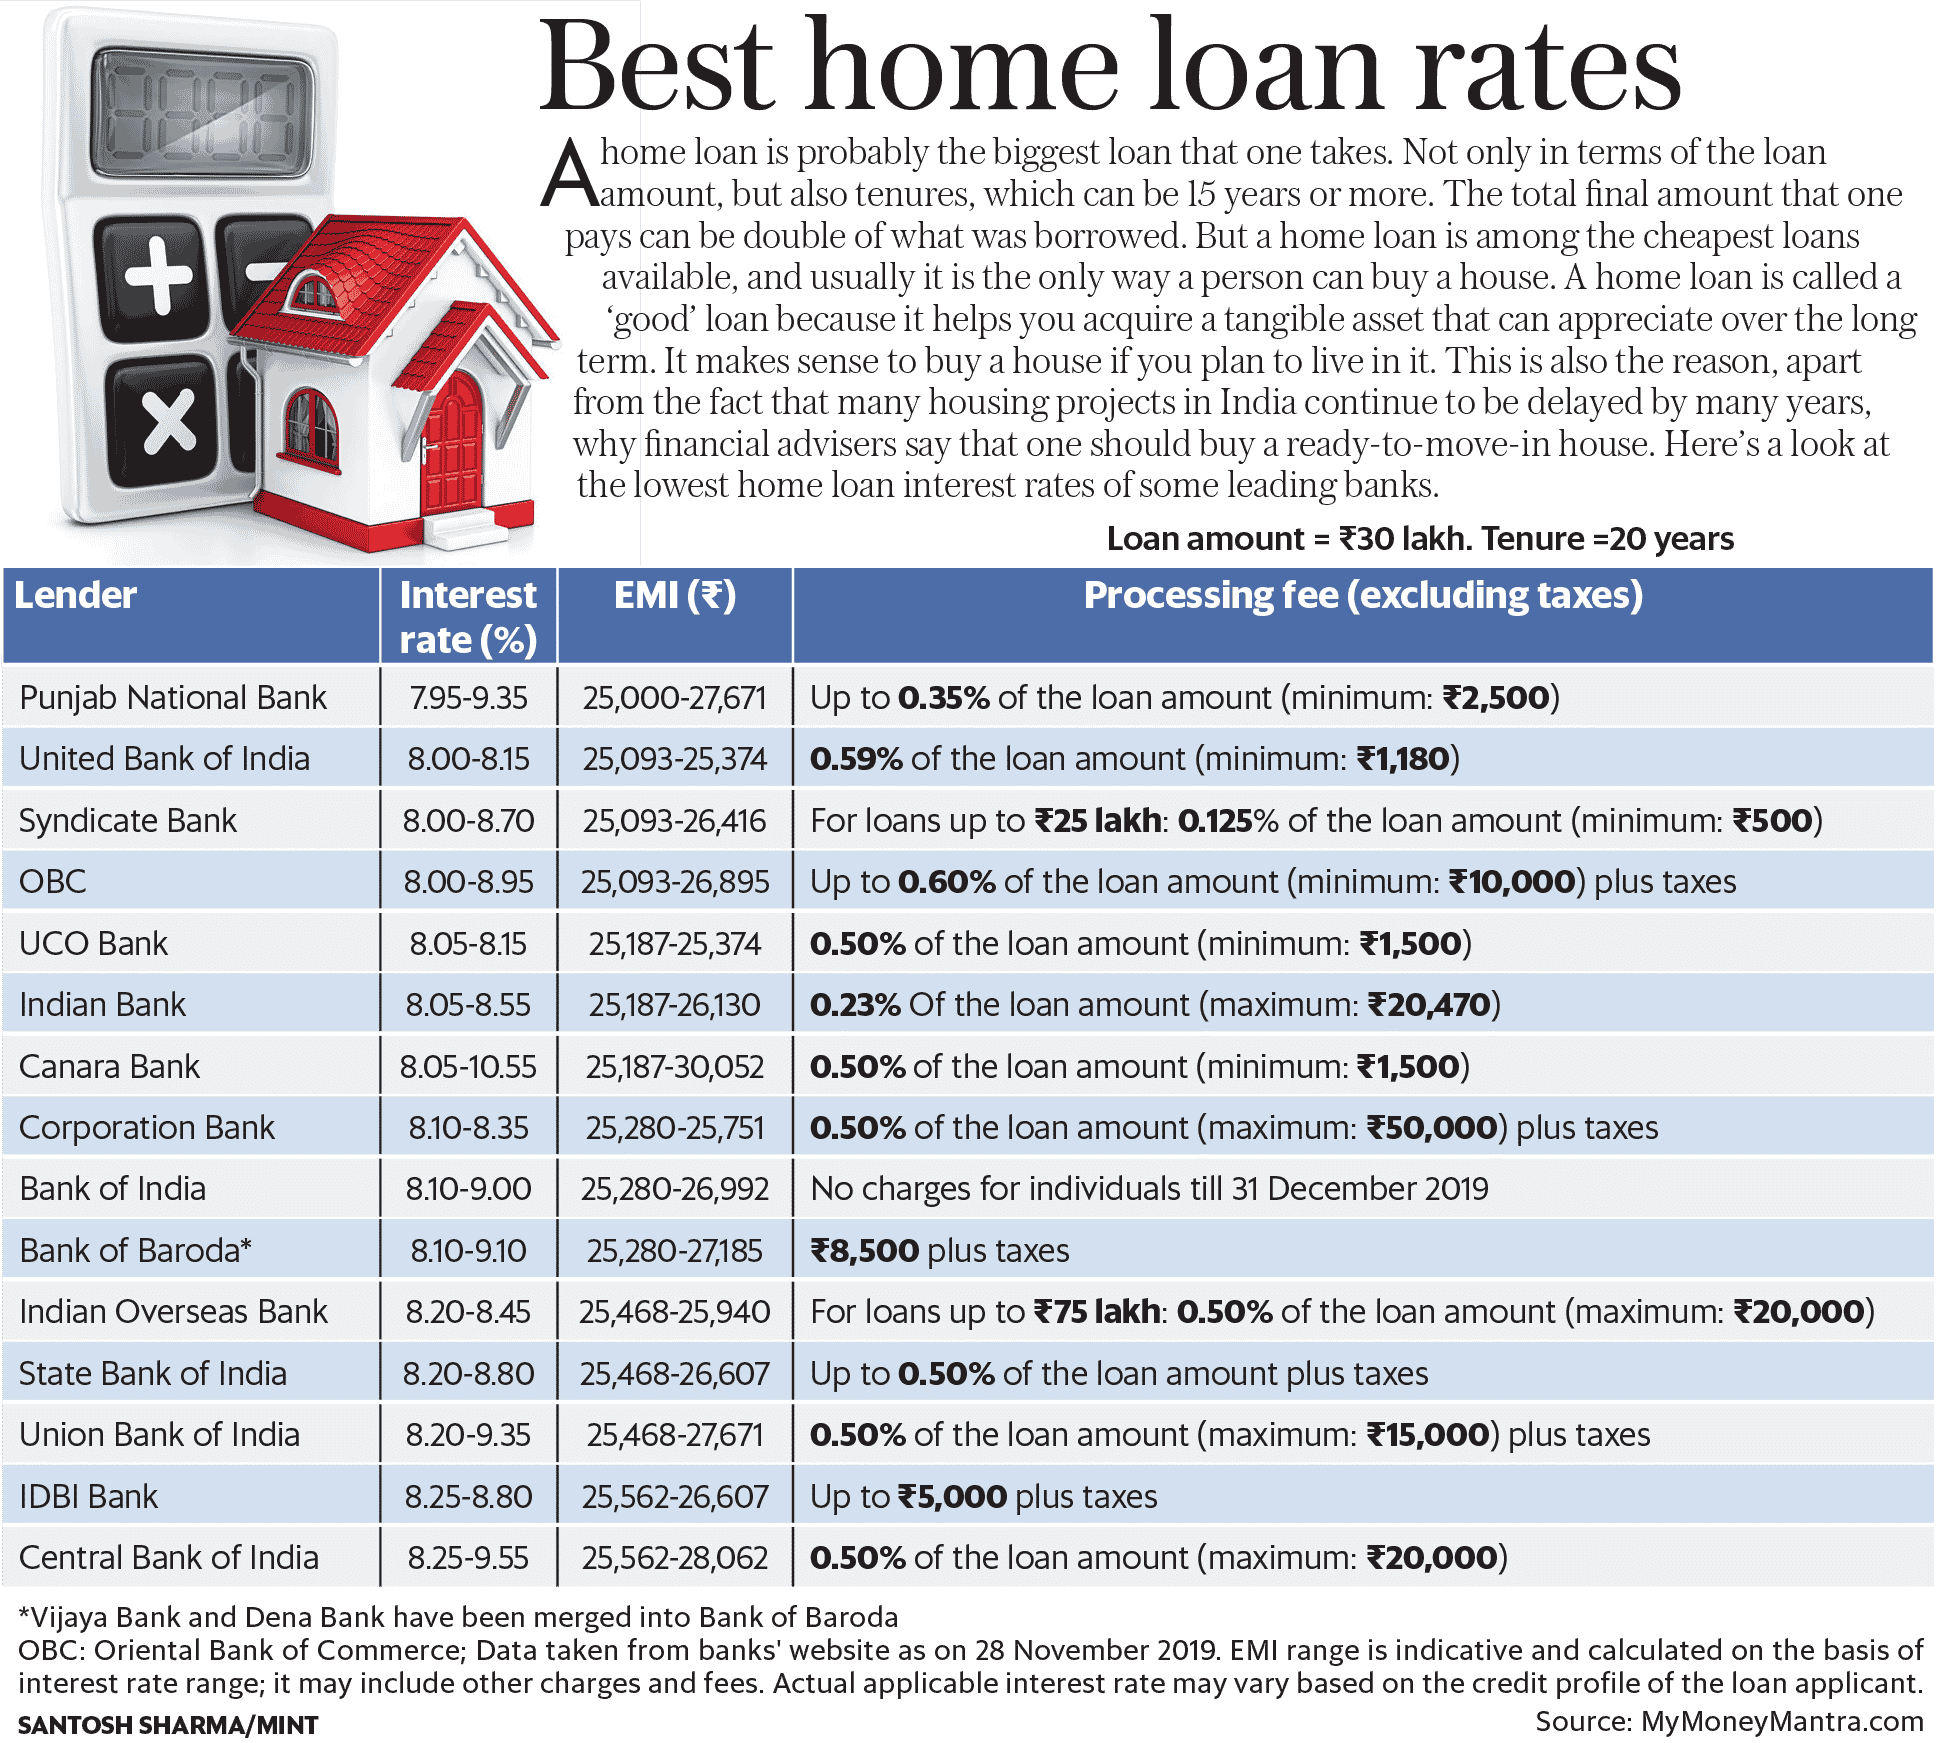 Home loan interest rates: Top 15 banks that offer the lowest